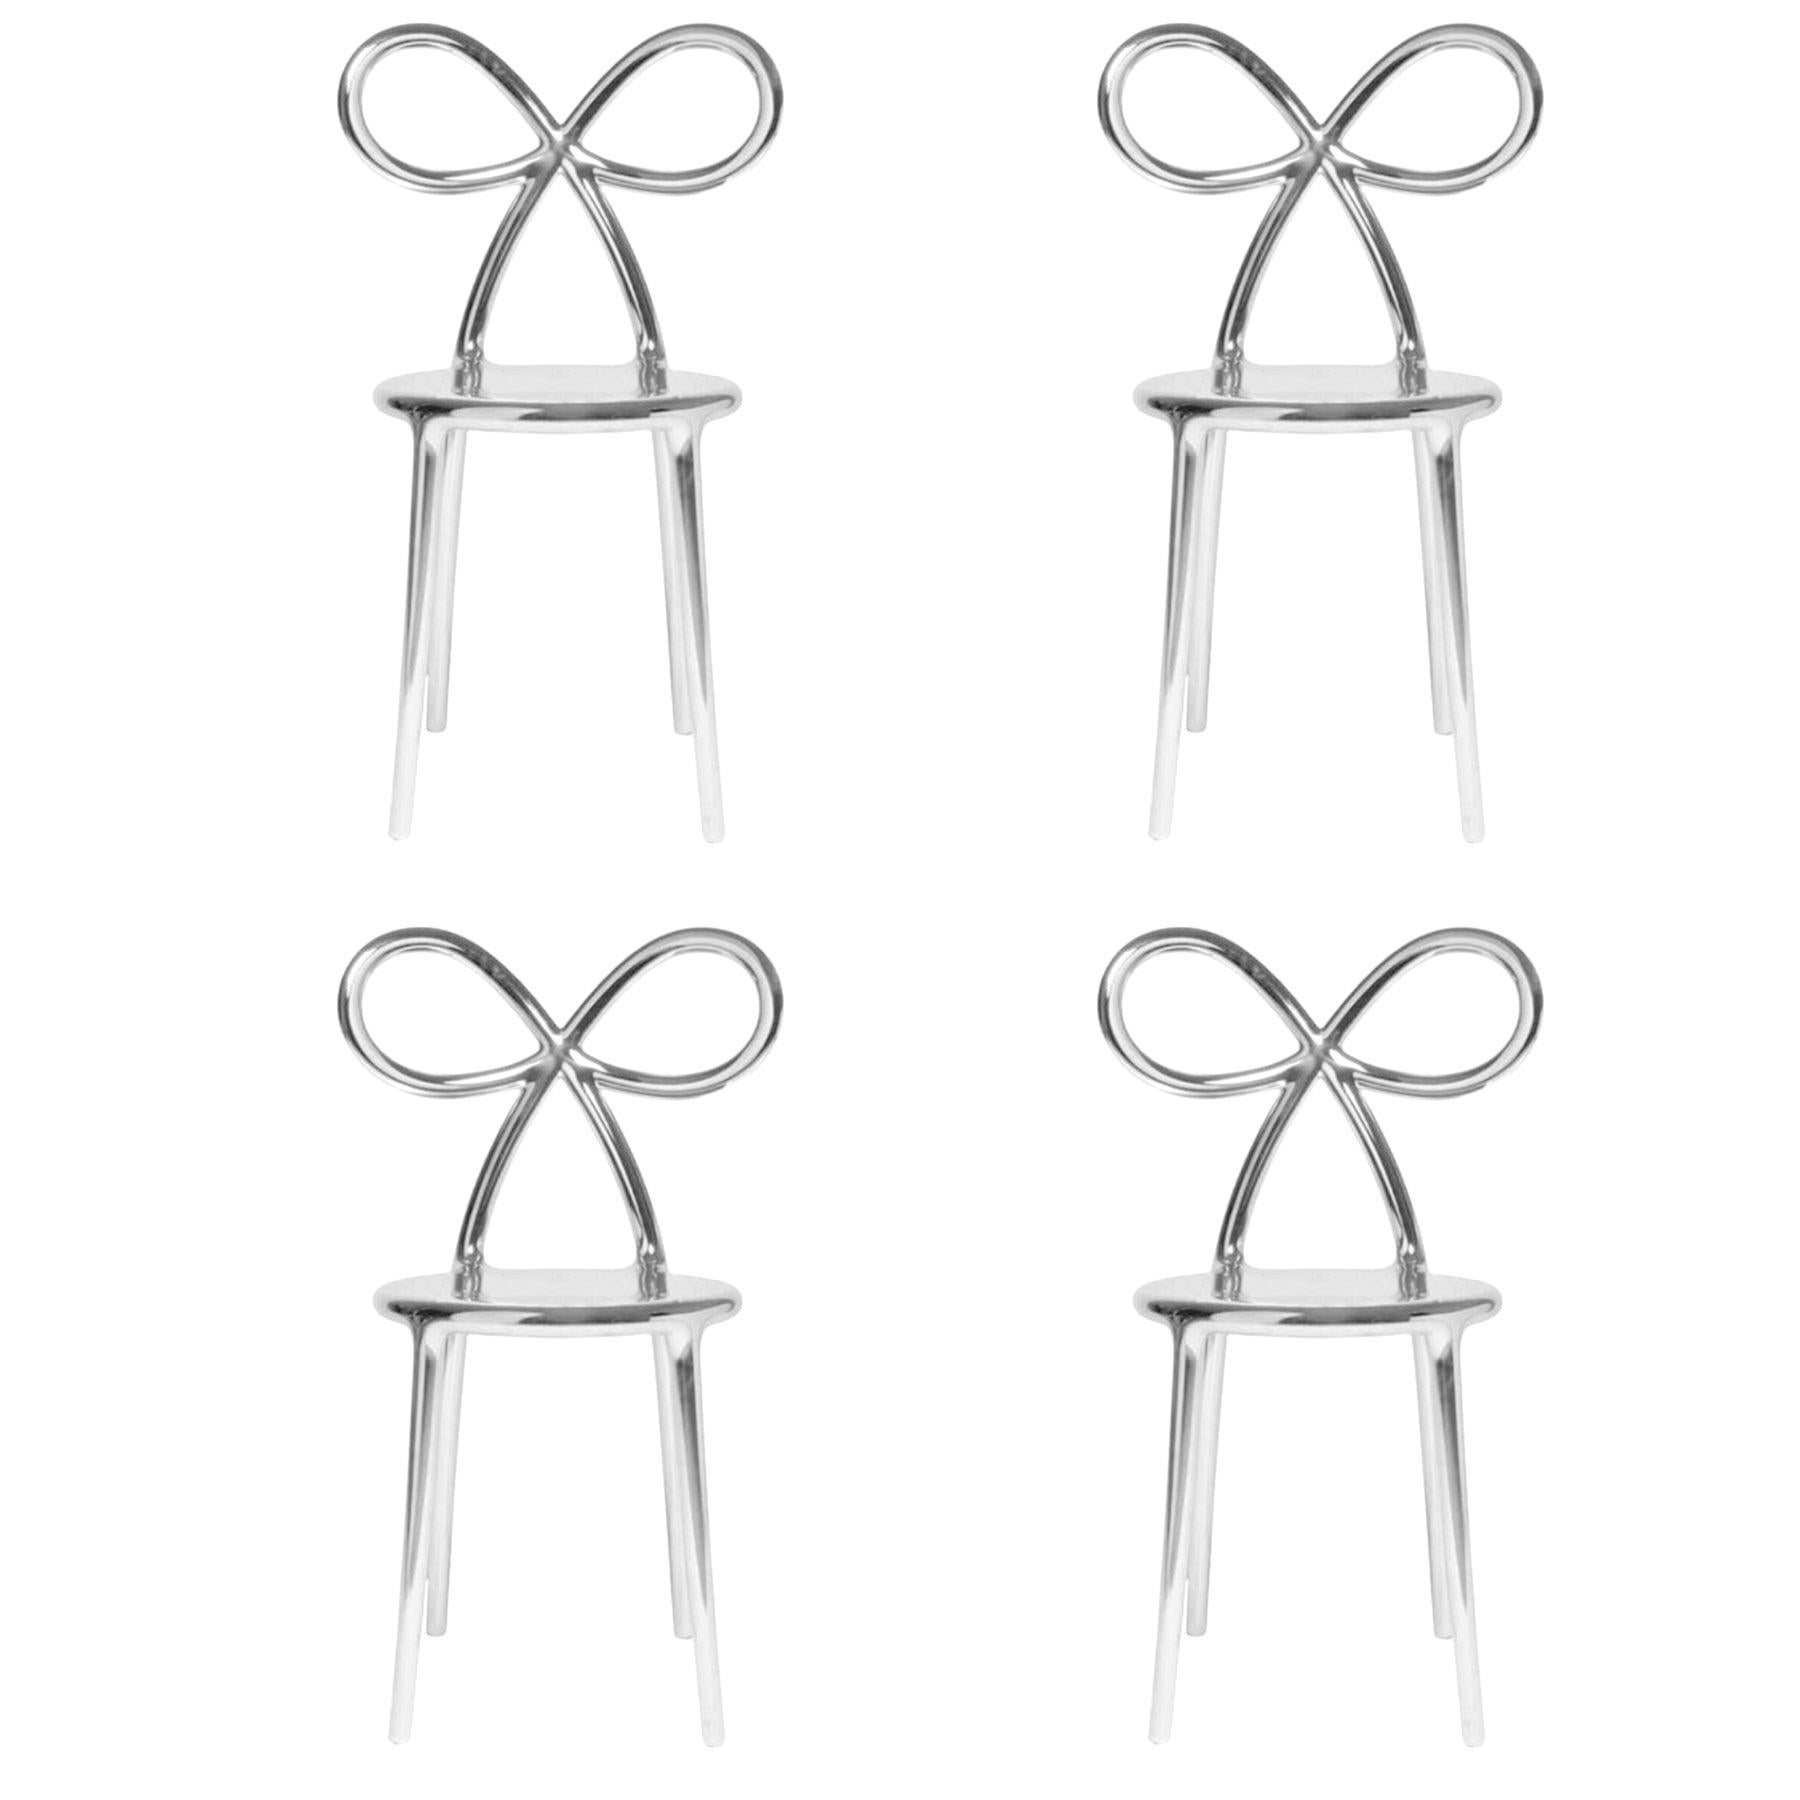 Set of 4 Silver Metallic Ribbon Chairs by Nika Zupanc, Made in Italy